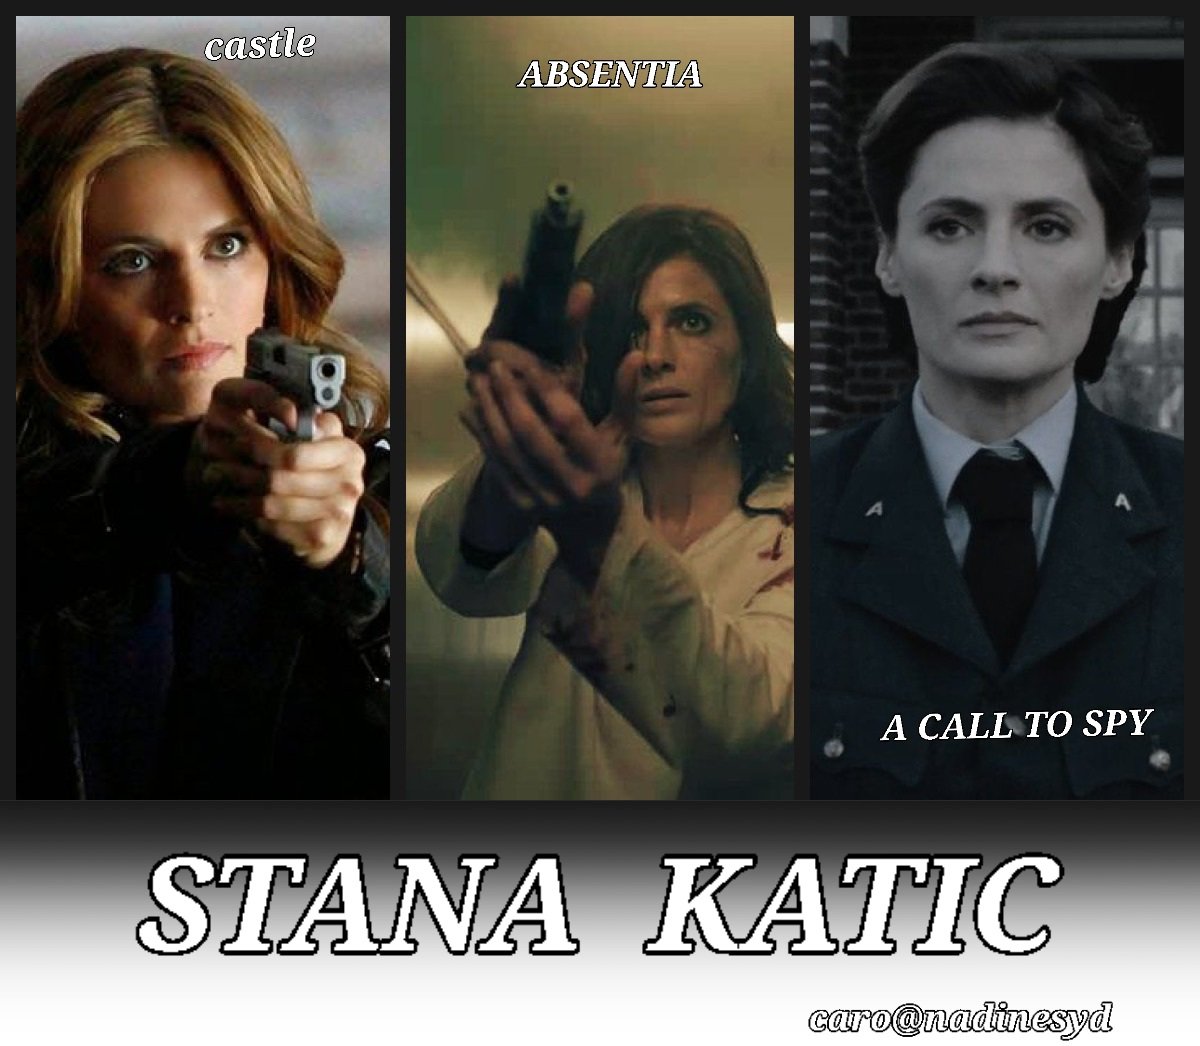 Happy Birthday, to the one, the only, the Always Super talented & Badass, #StanaKatic who played #KateBeckett in @Castle_ABC #Emily in #Absentia  & #Vera in #ACallToSpy you are deeply missed on Twitter, and we all hope to see you again one day 😃😁😎
#HAPPYBIRTHDAY 🎉🎊🎁🥳🎂